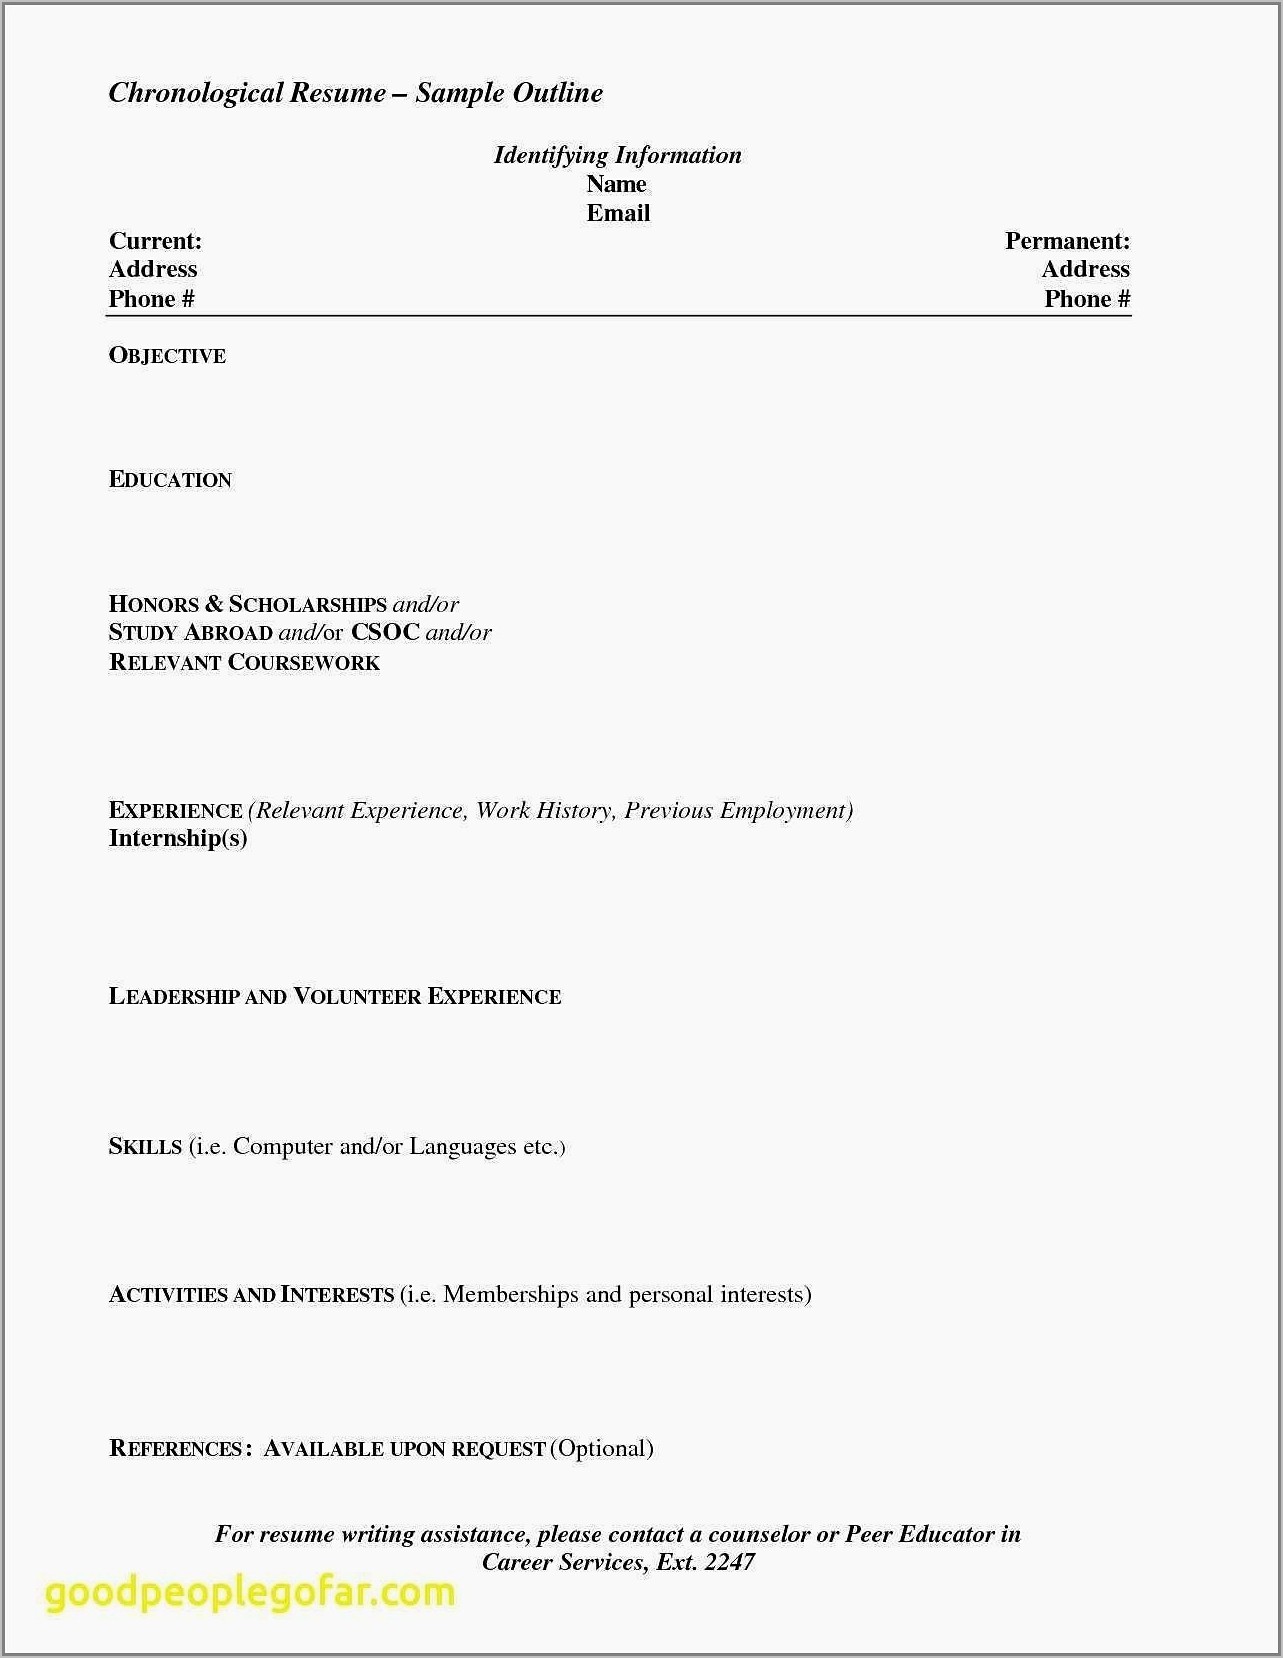 Resume Format For Nurses Abroad